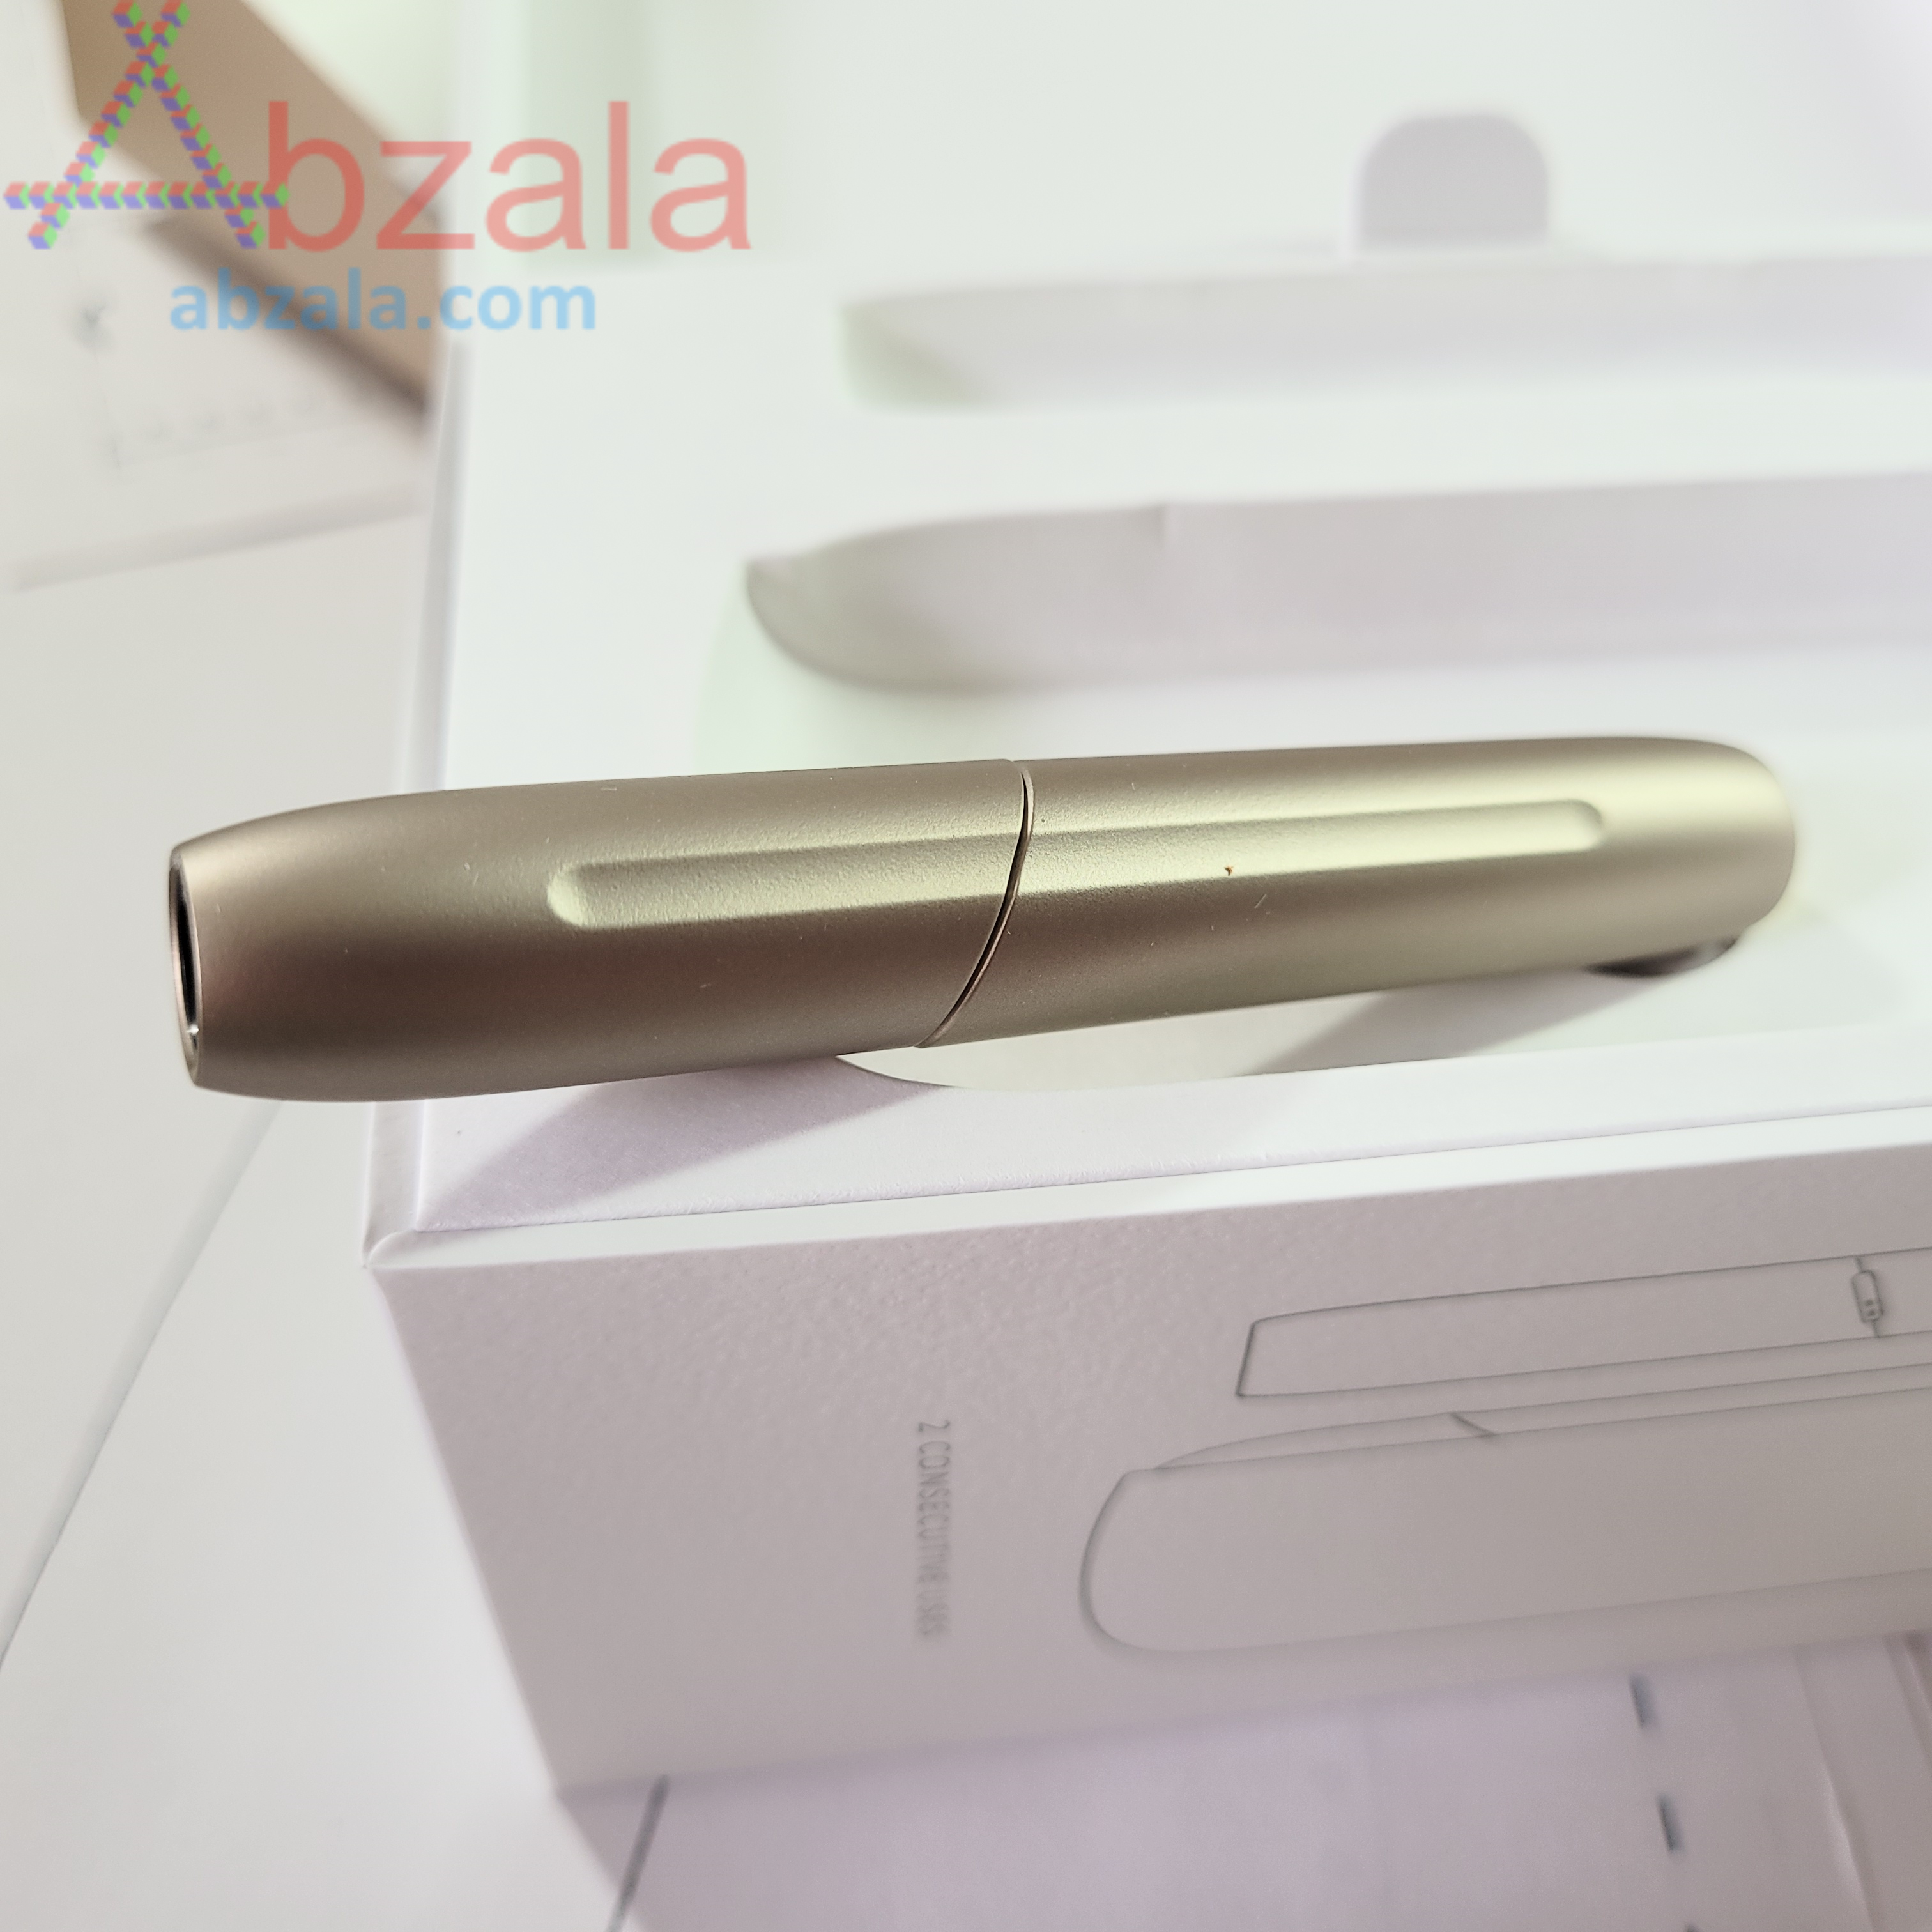 New IQOS 3 DUO - Heated tobacco products - Eurotabaco Blog